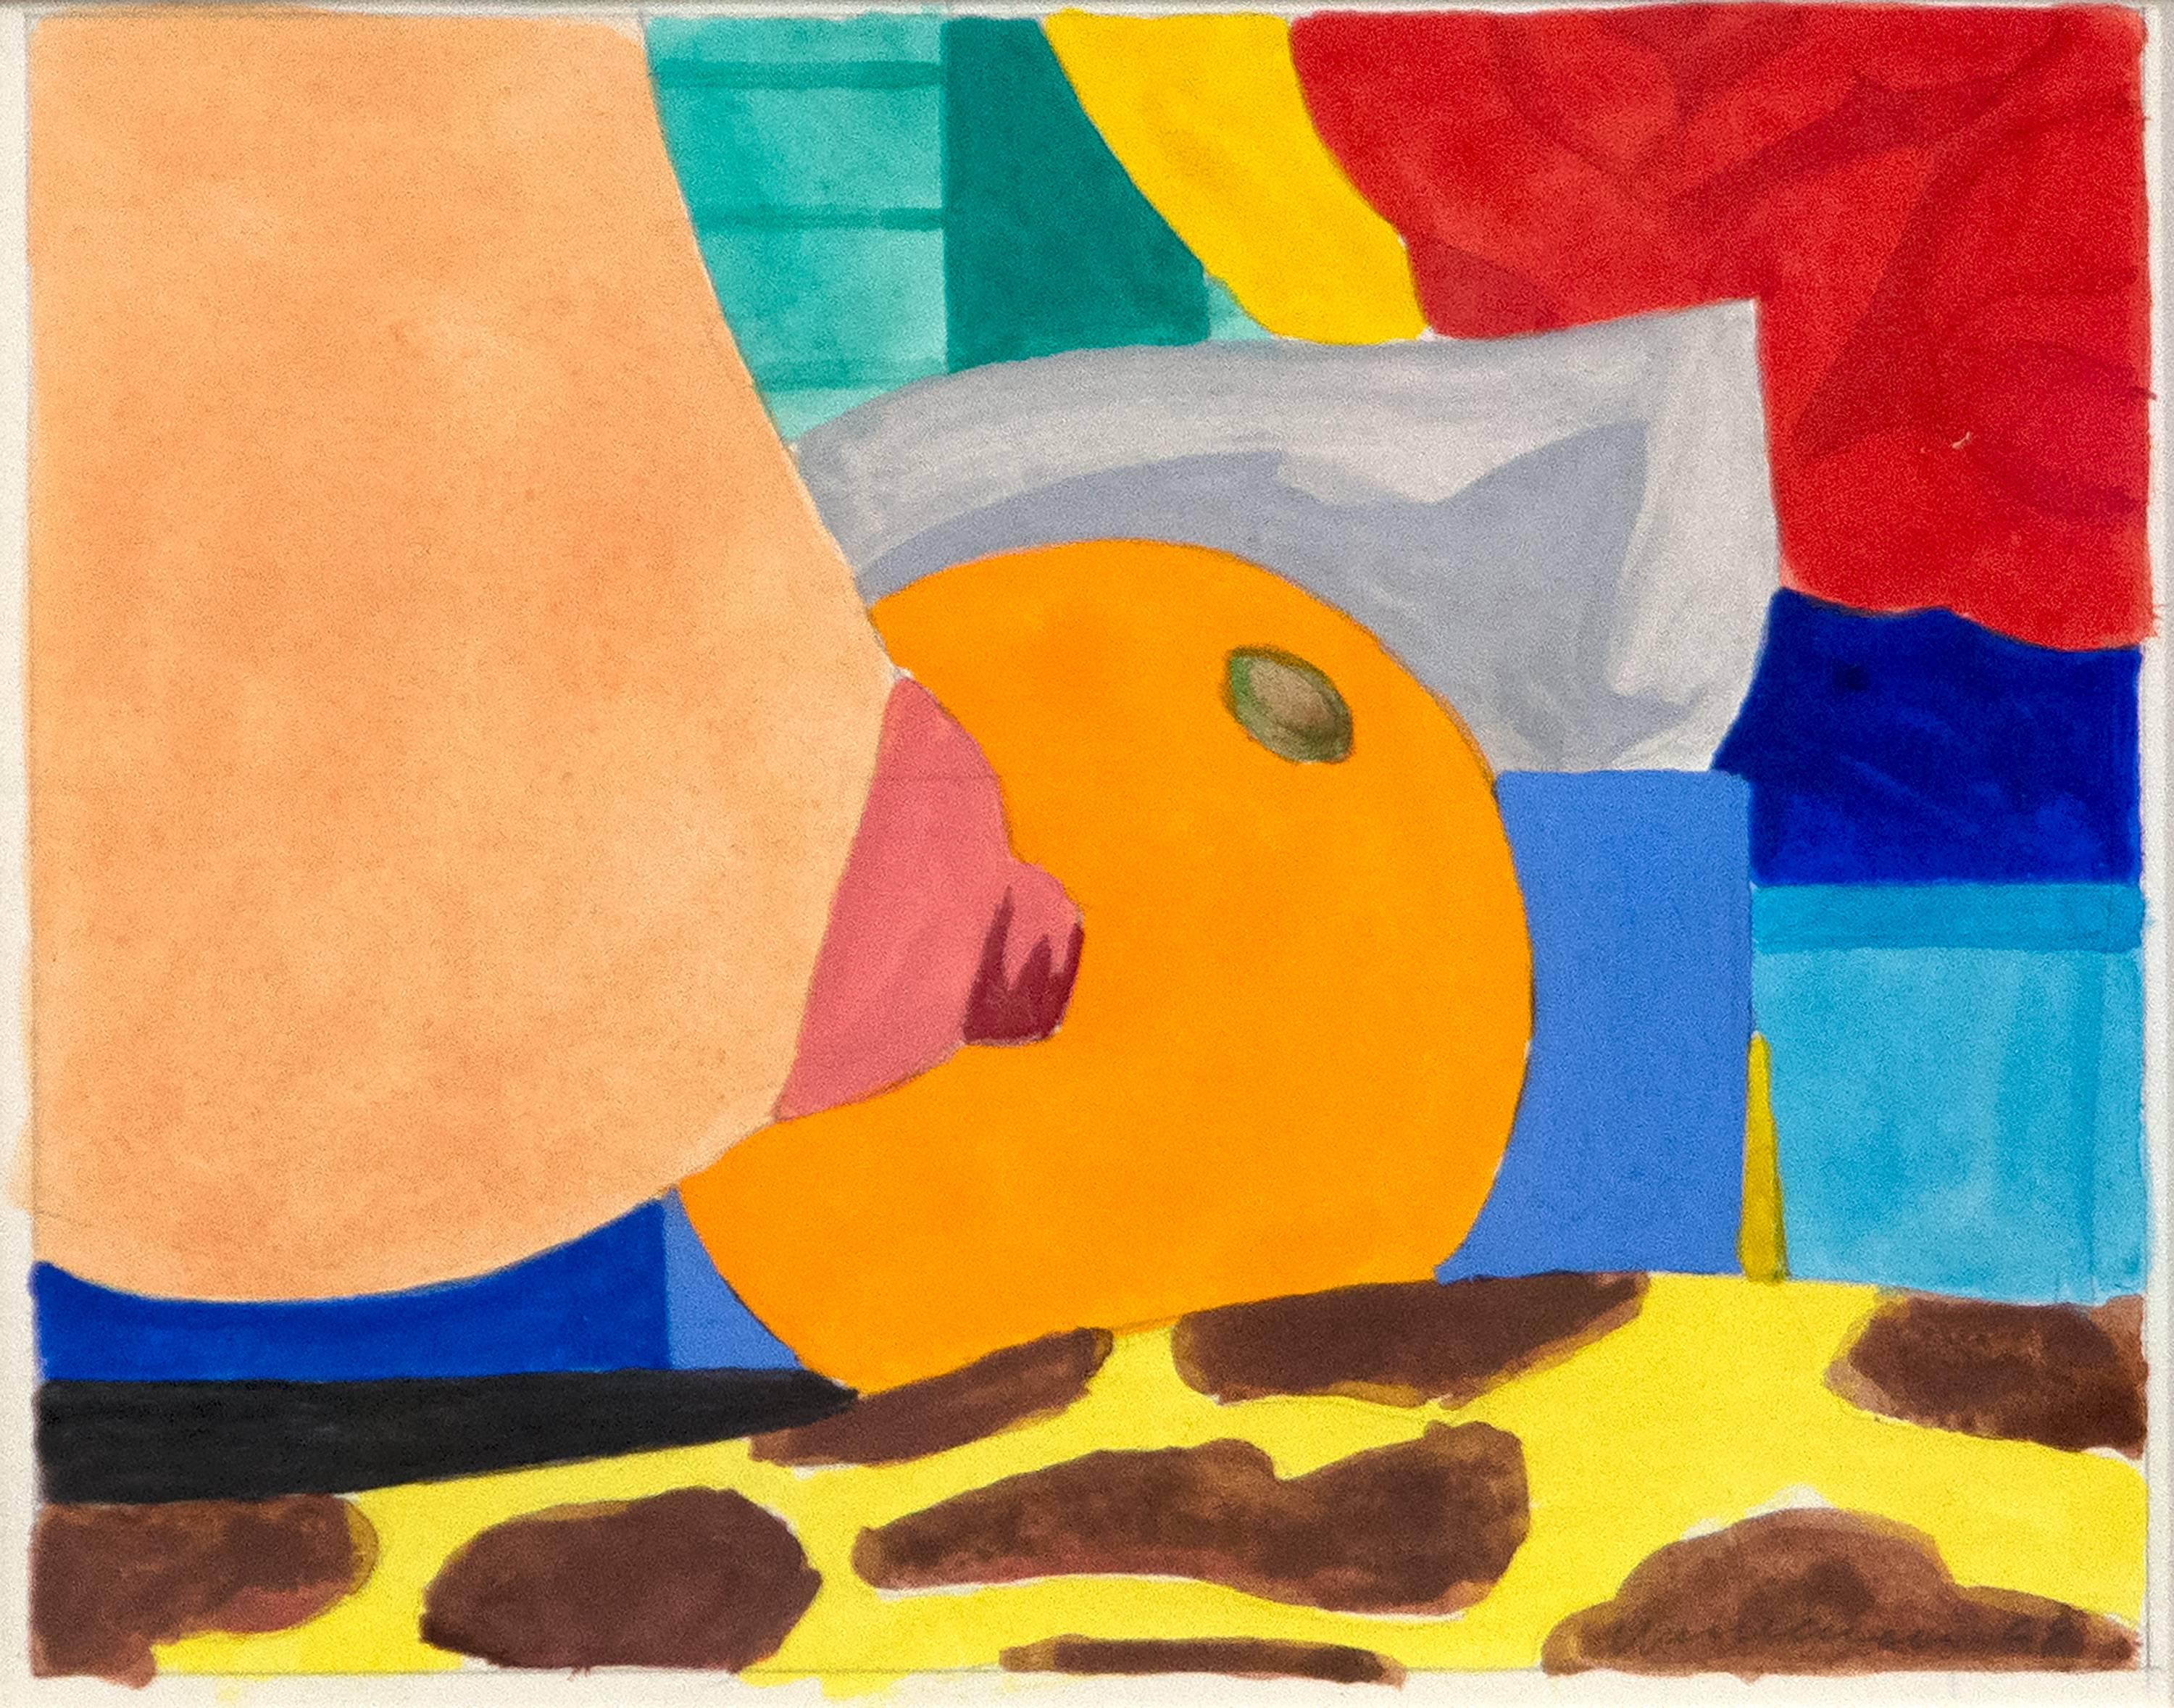 Tom Wesselmann Nude - Study for Bedroom Painting #6